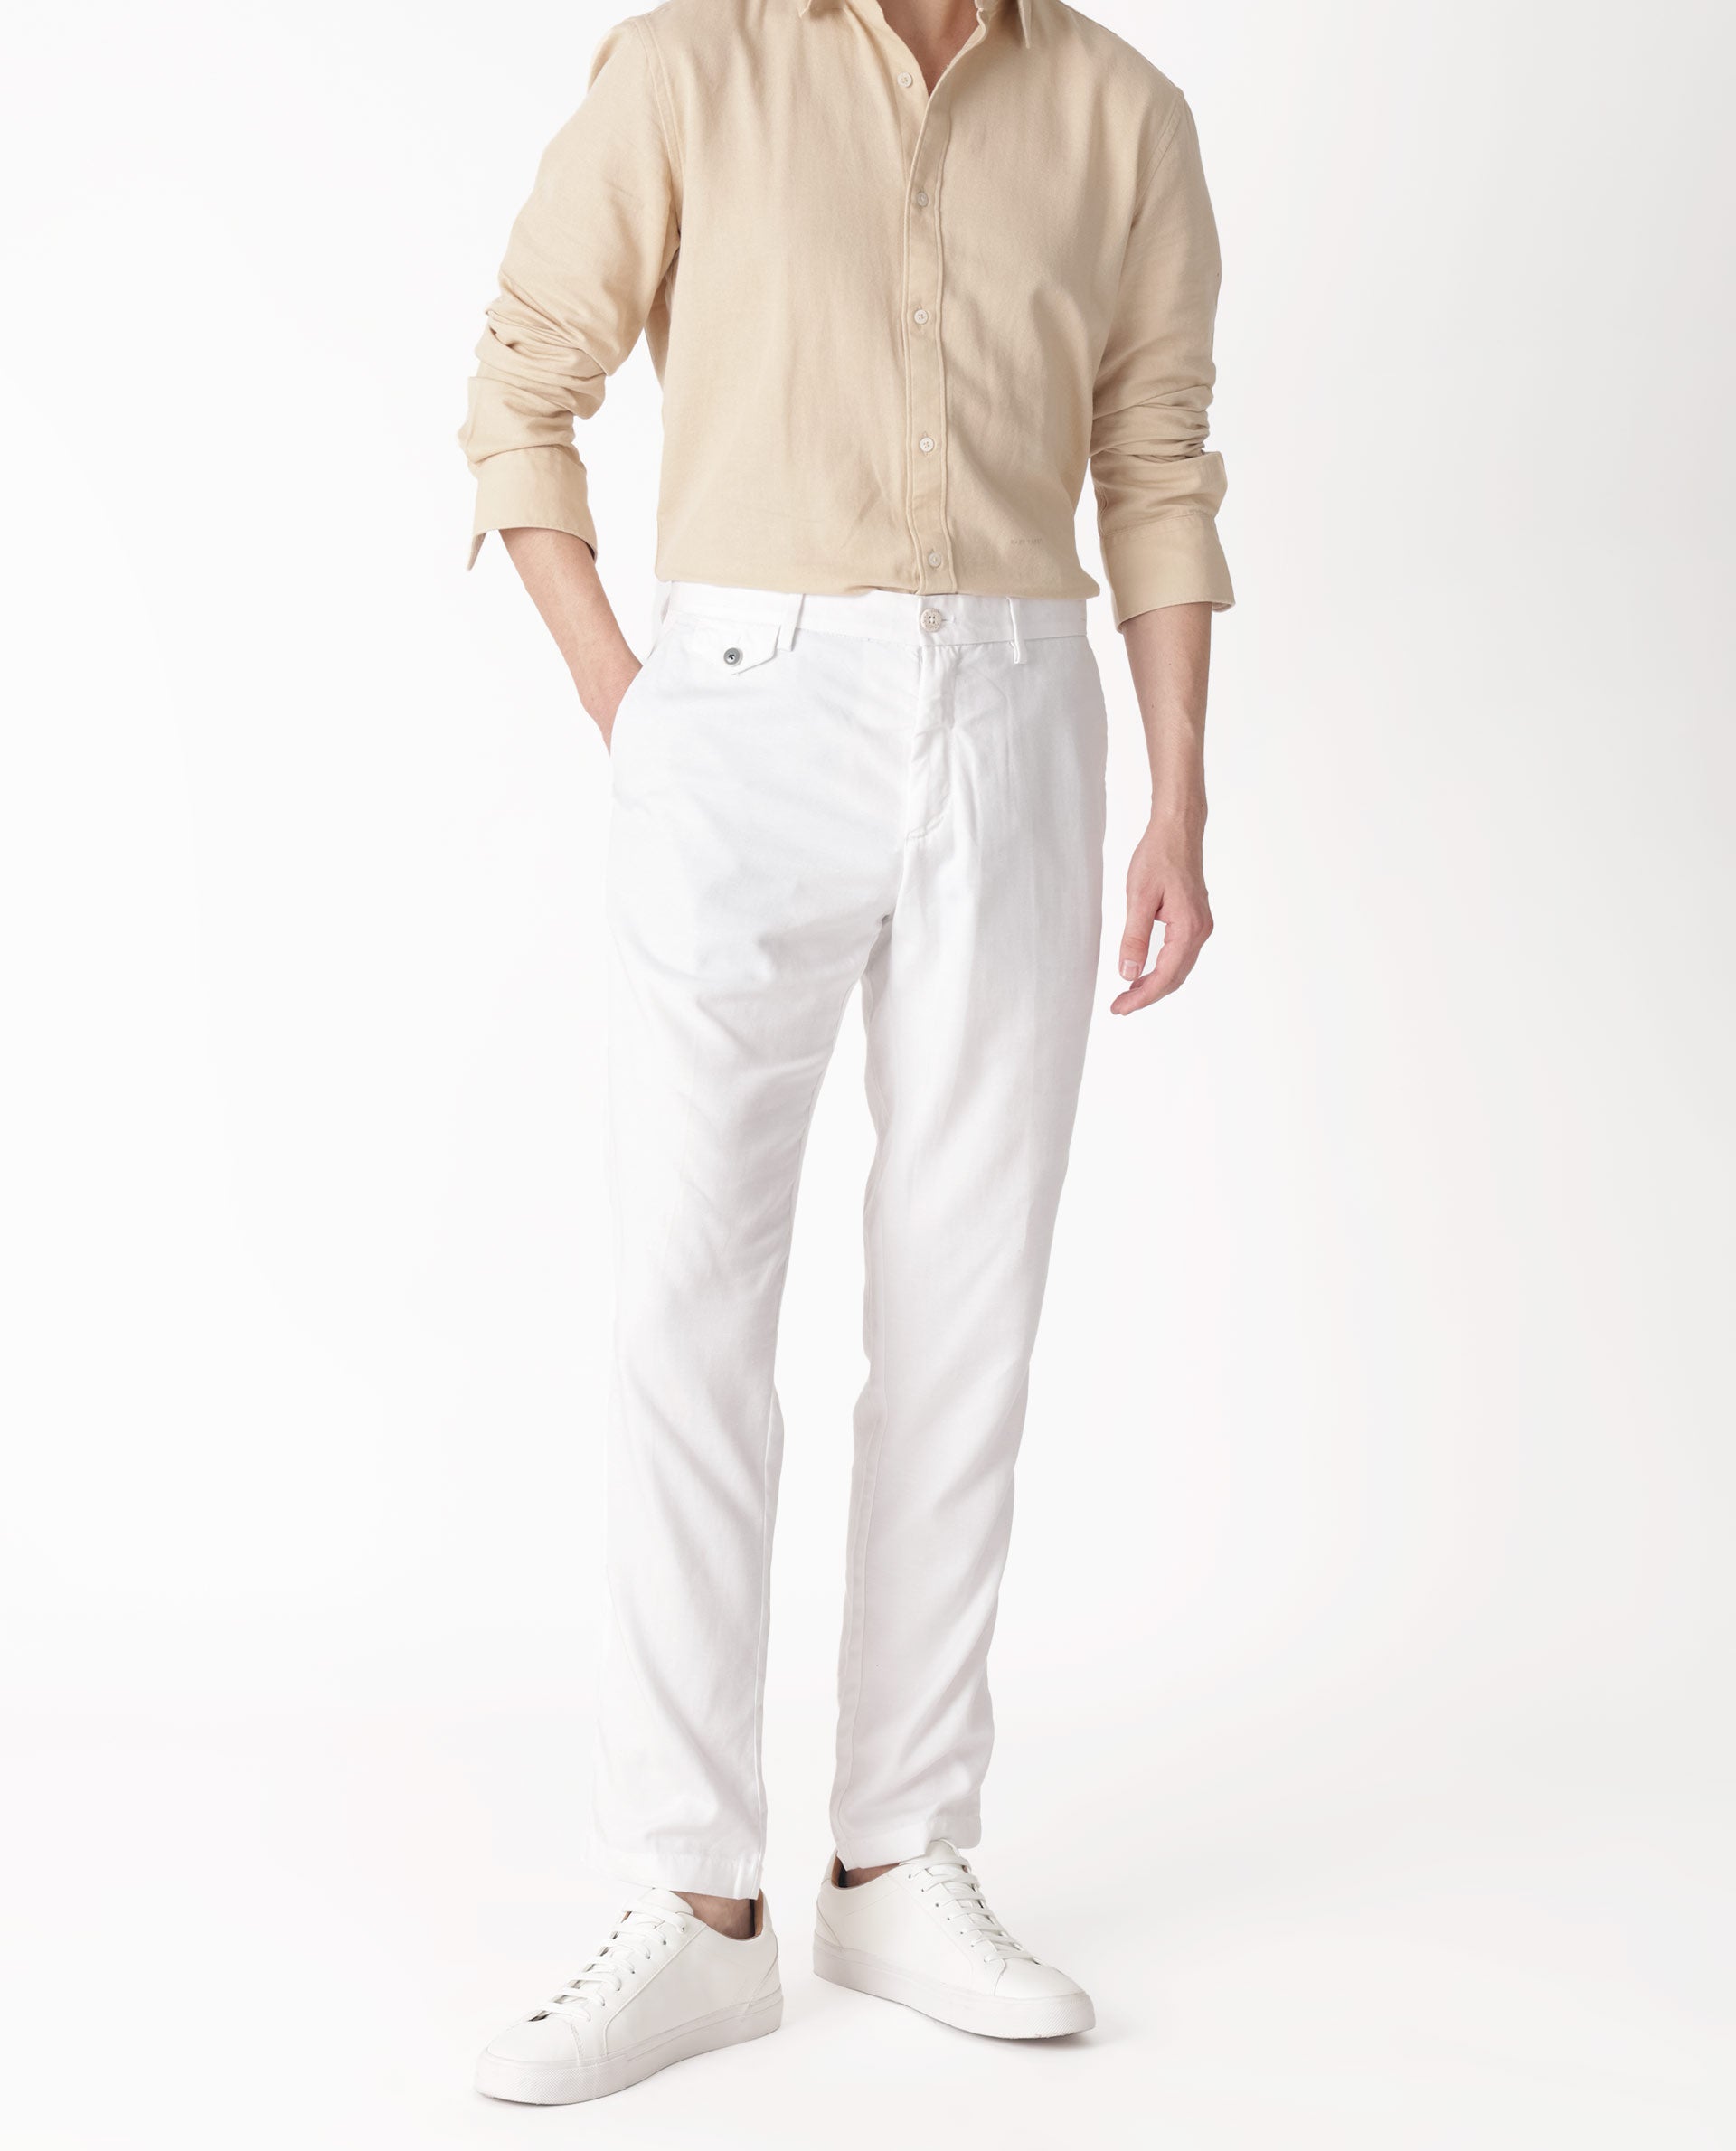 Tiered Button-Down Shirt and White Trousers Set for Women